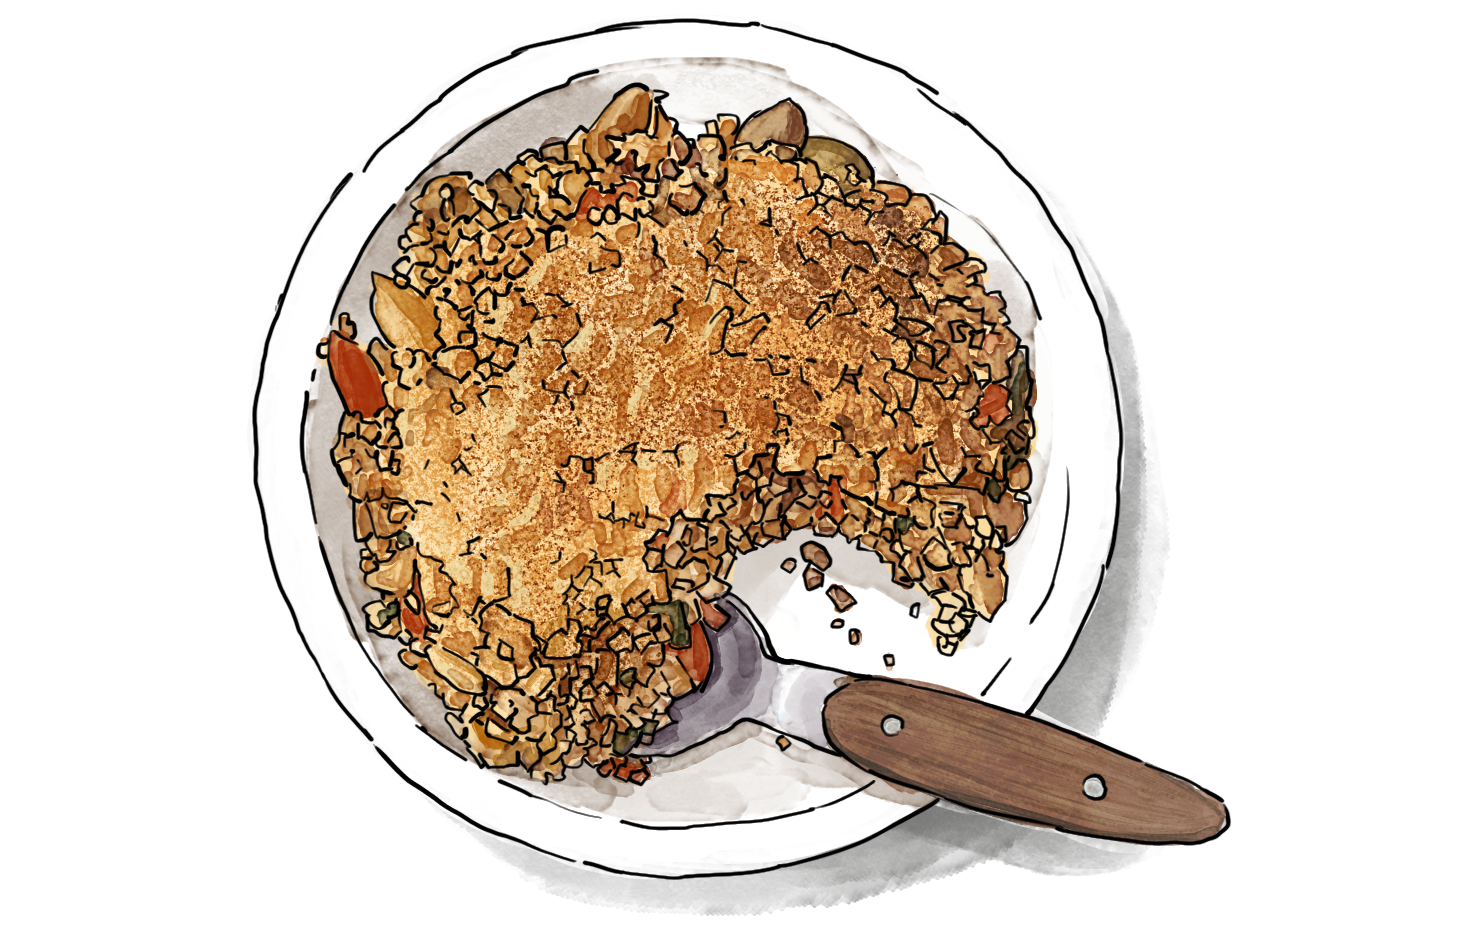 Illustration of a Vegetables Crumble with Parmigiano Crust